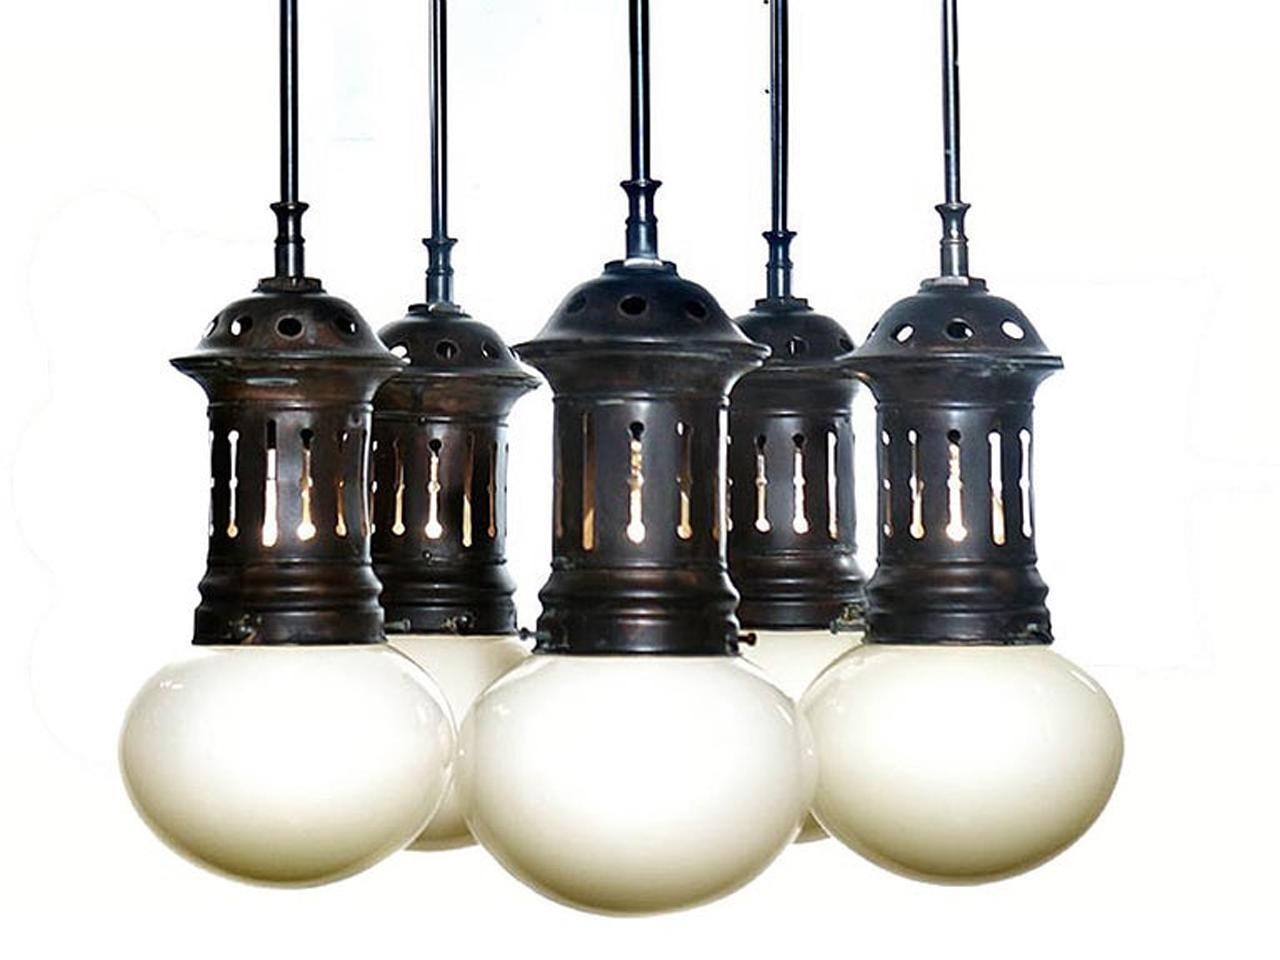 Stroll into New York's Park Avenue armory and you will see the striking multi-globe lamps in the front lobby. This amazing chandelier has that early municipal look. These early and elegant bun shaped hand blown shades are Vaseline over white